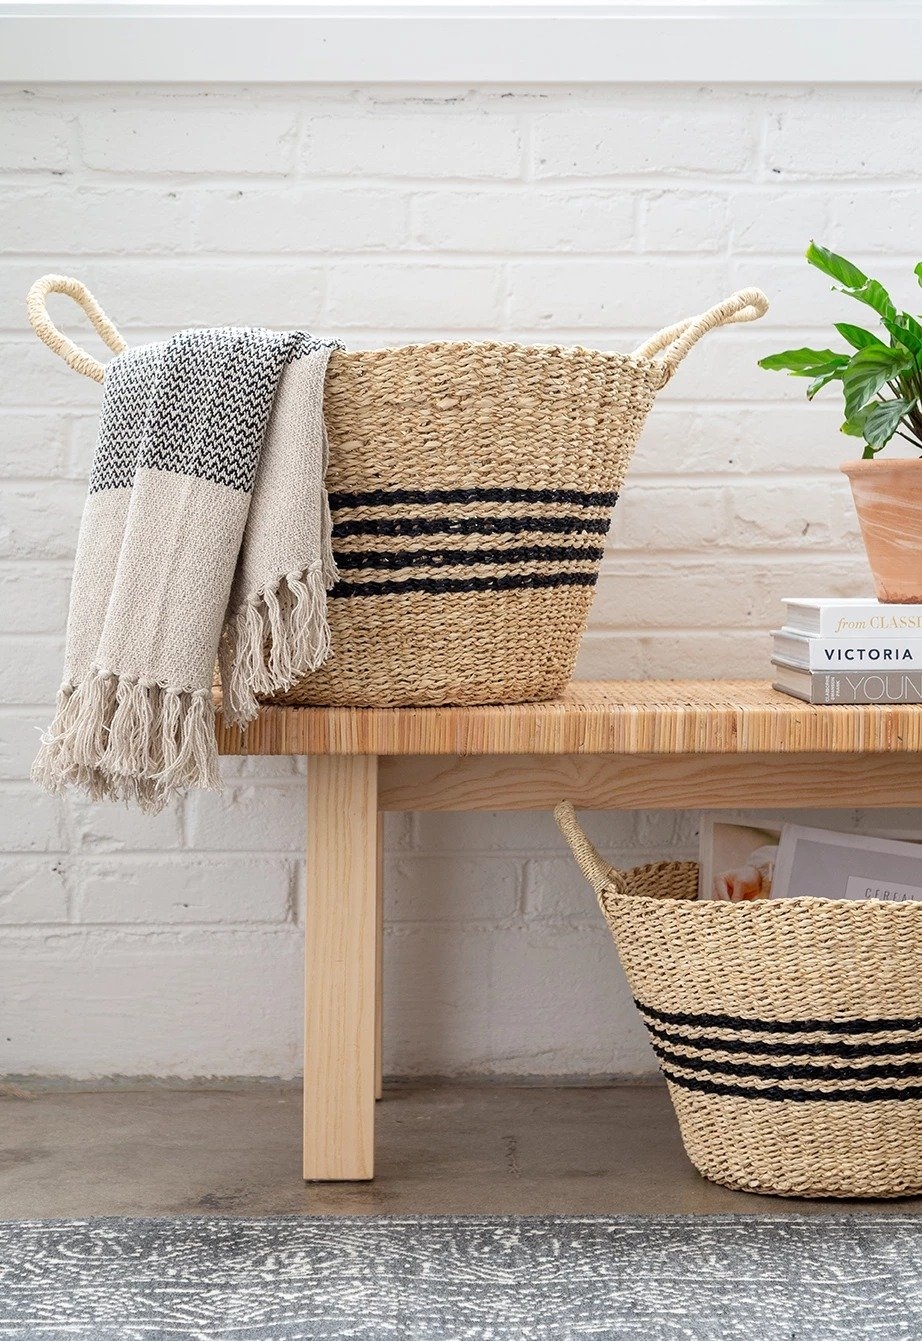 Discontinued - Chatham Striped Baskets, Set of 2 - Image 1